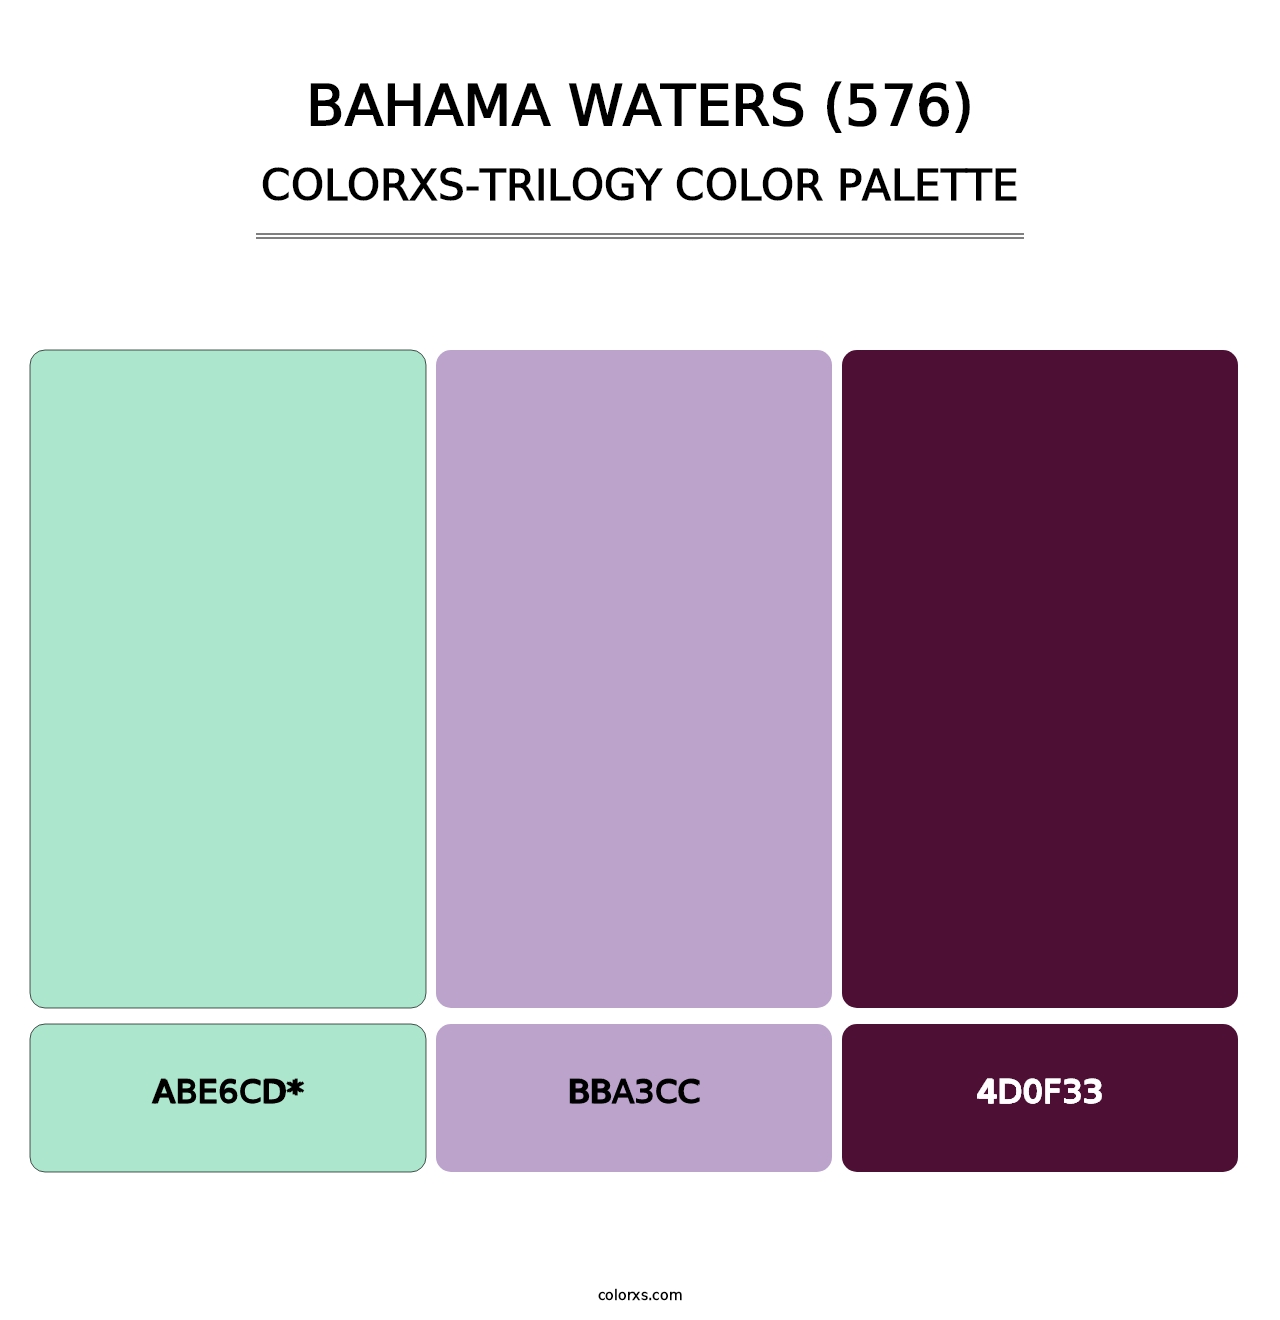 Bahama Waters (576) - Colorxs Trilogy Palette